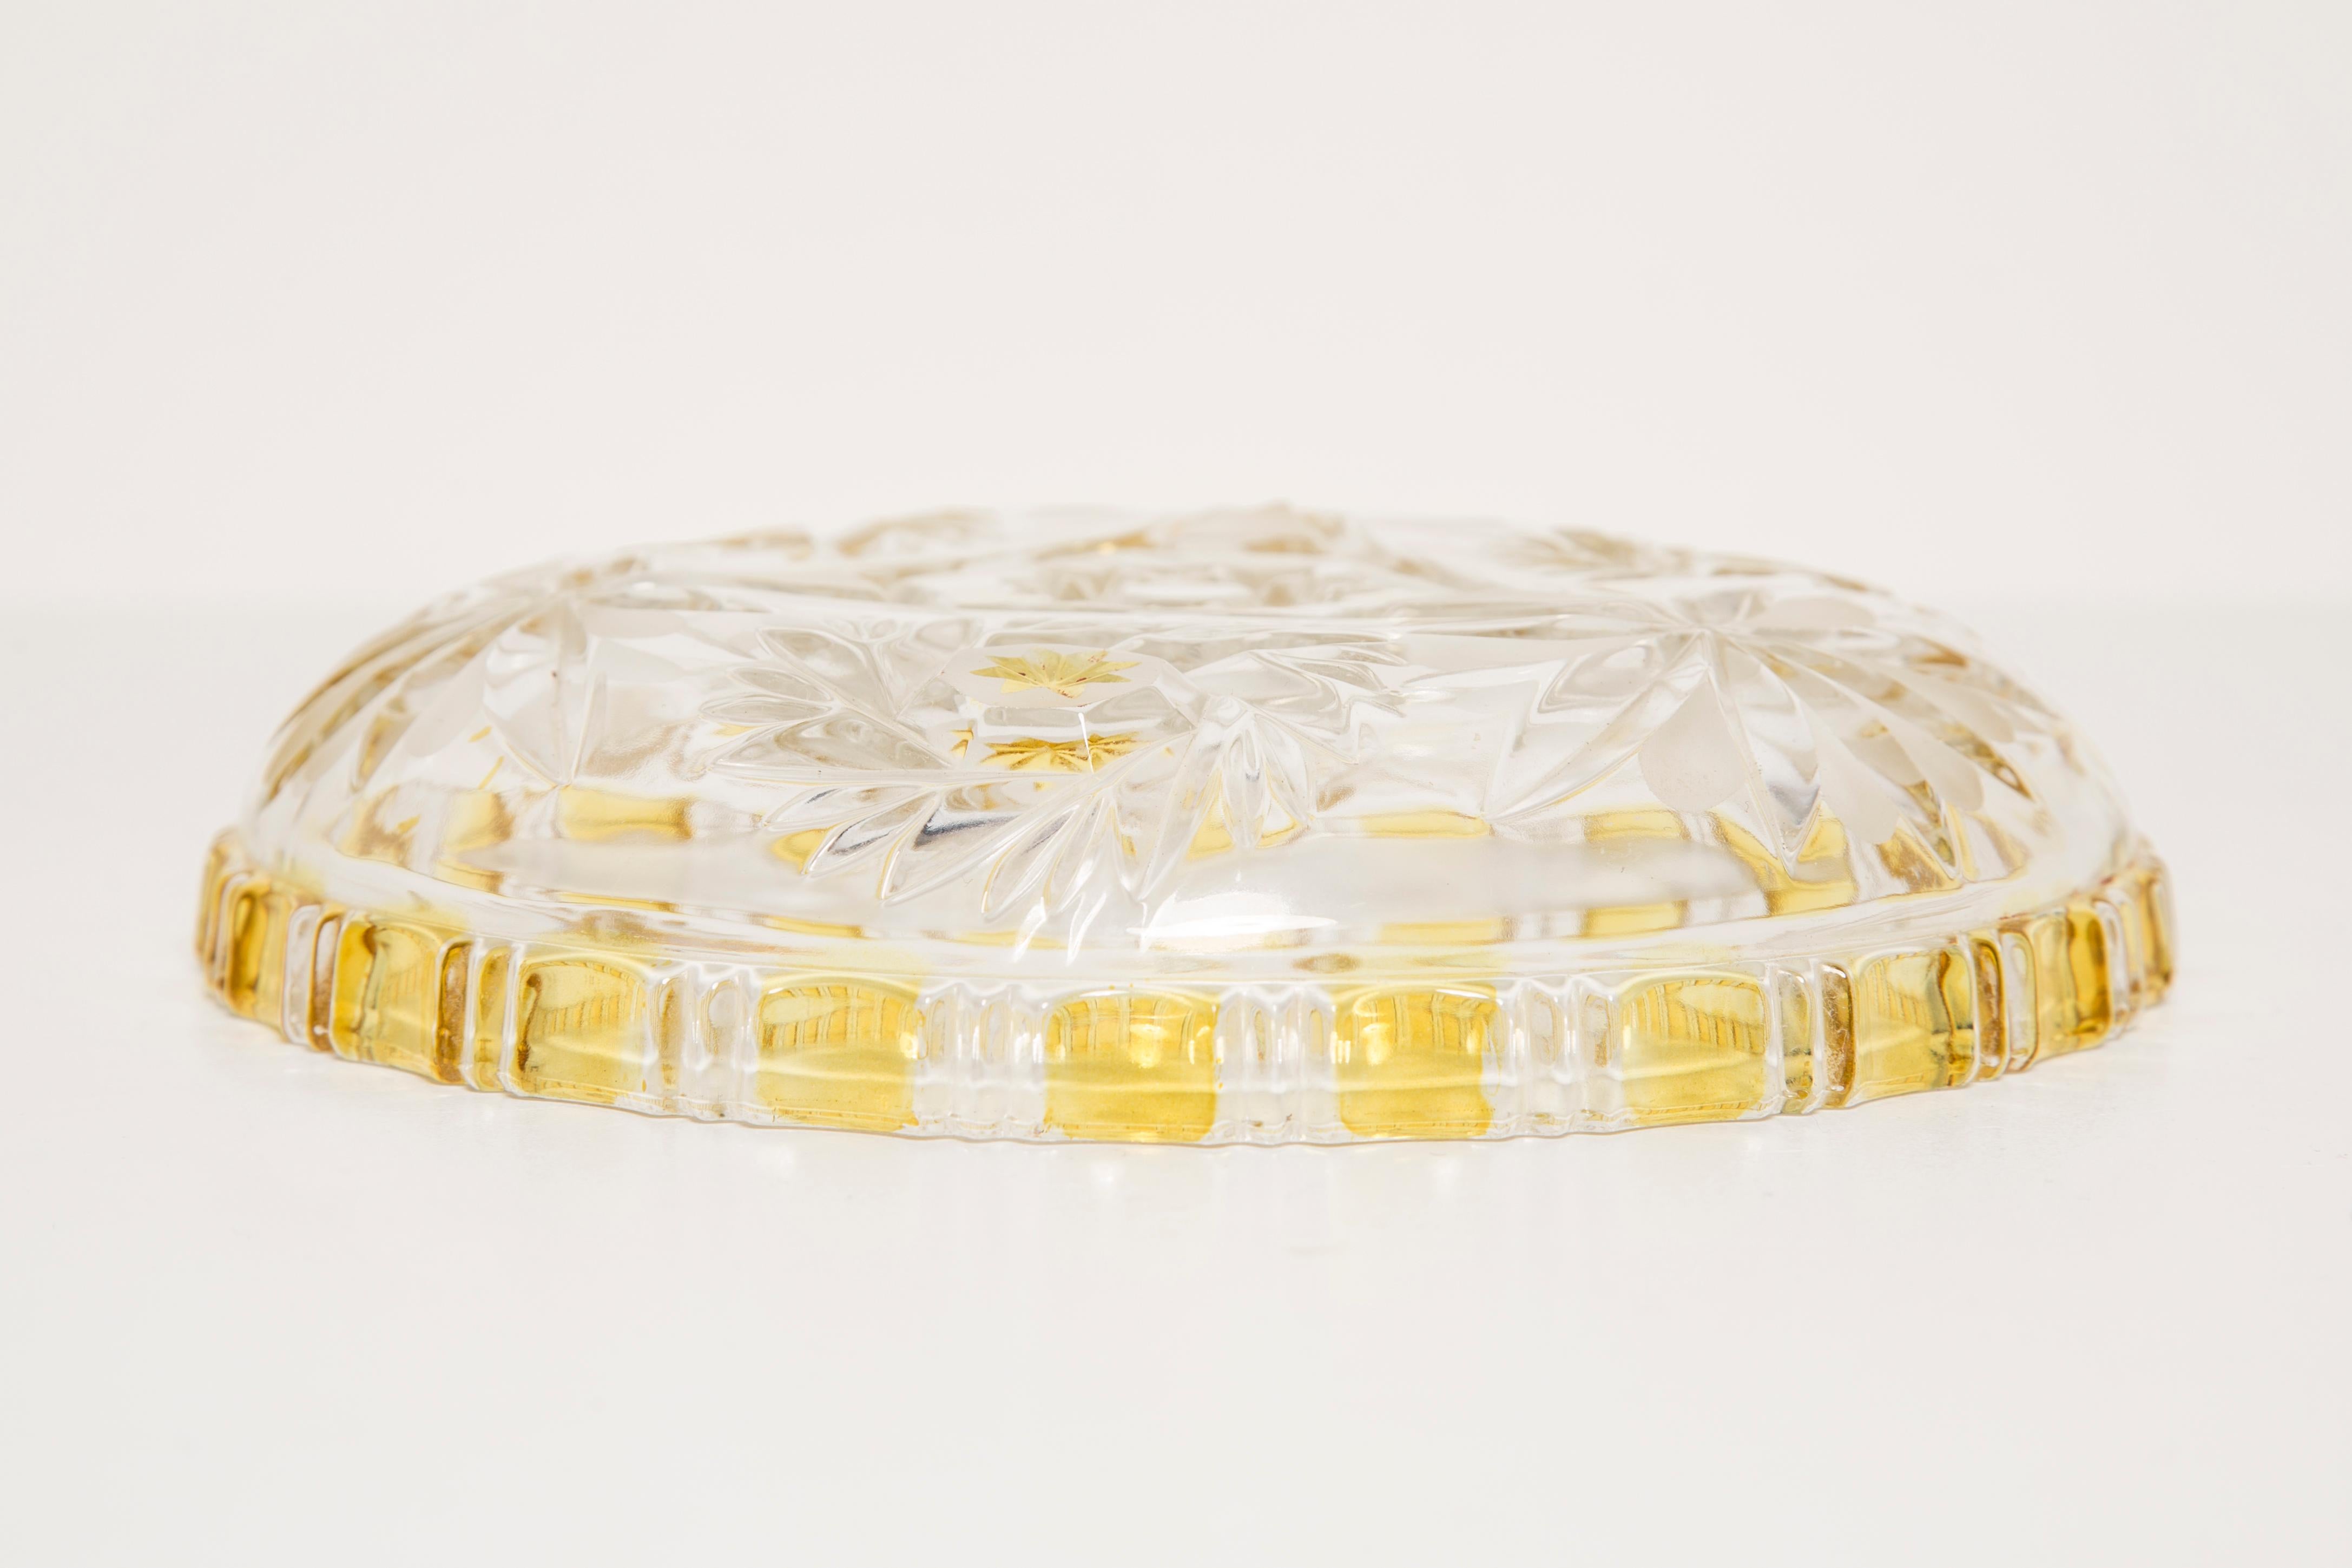 Vintage Transparent and Yellow Decorative Glass Plate, Italy, 1960s For Sale 6